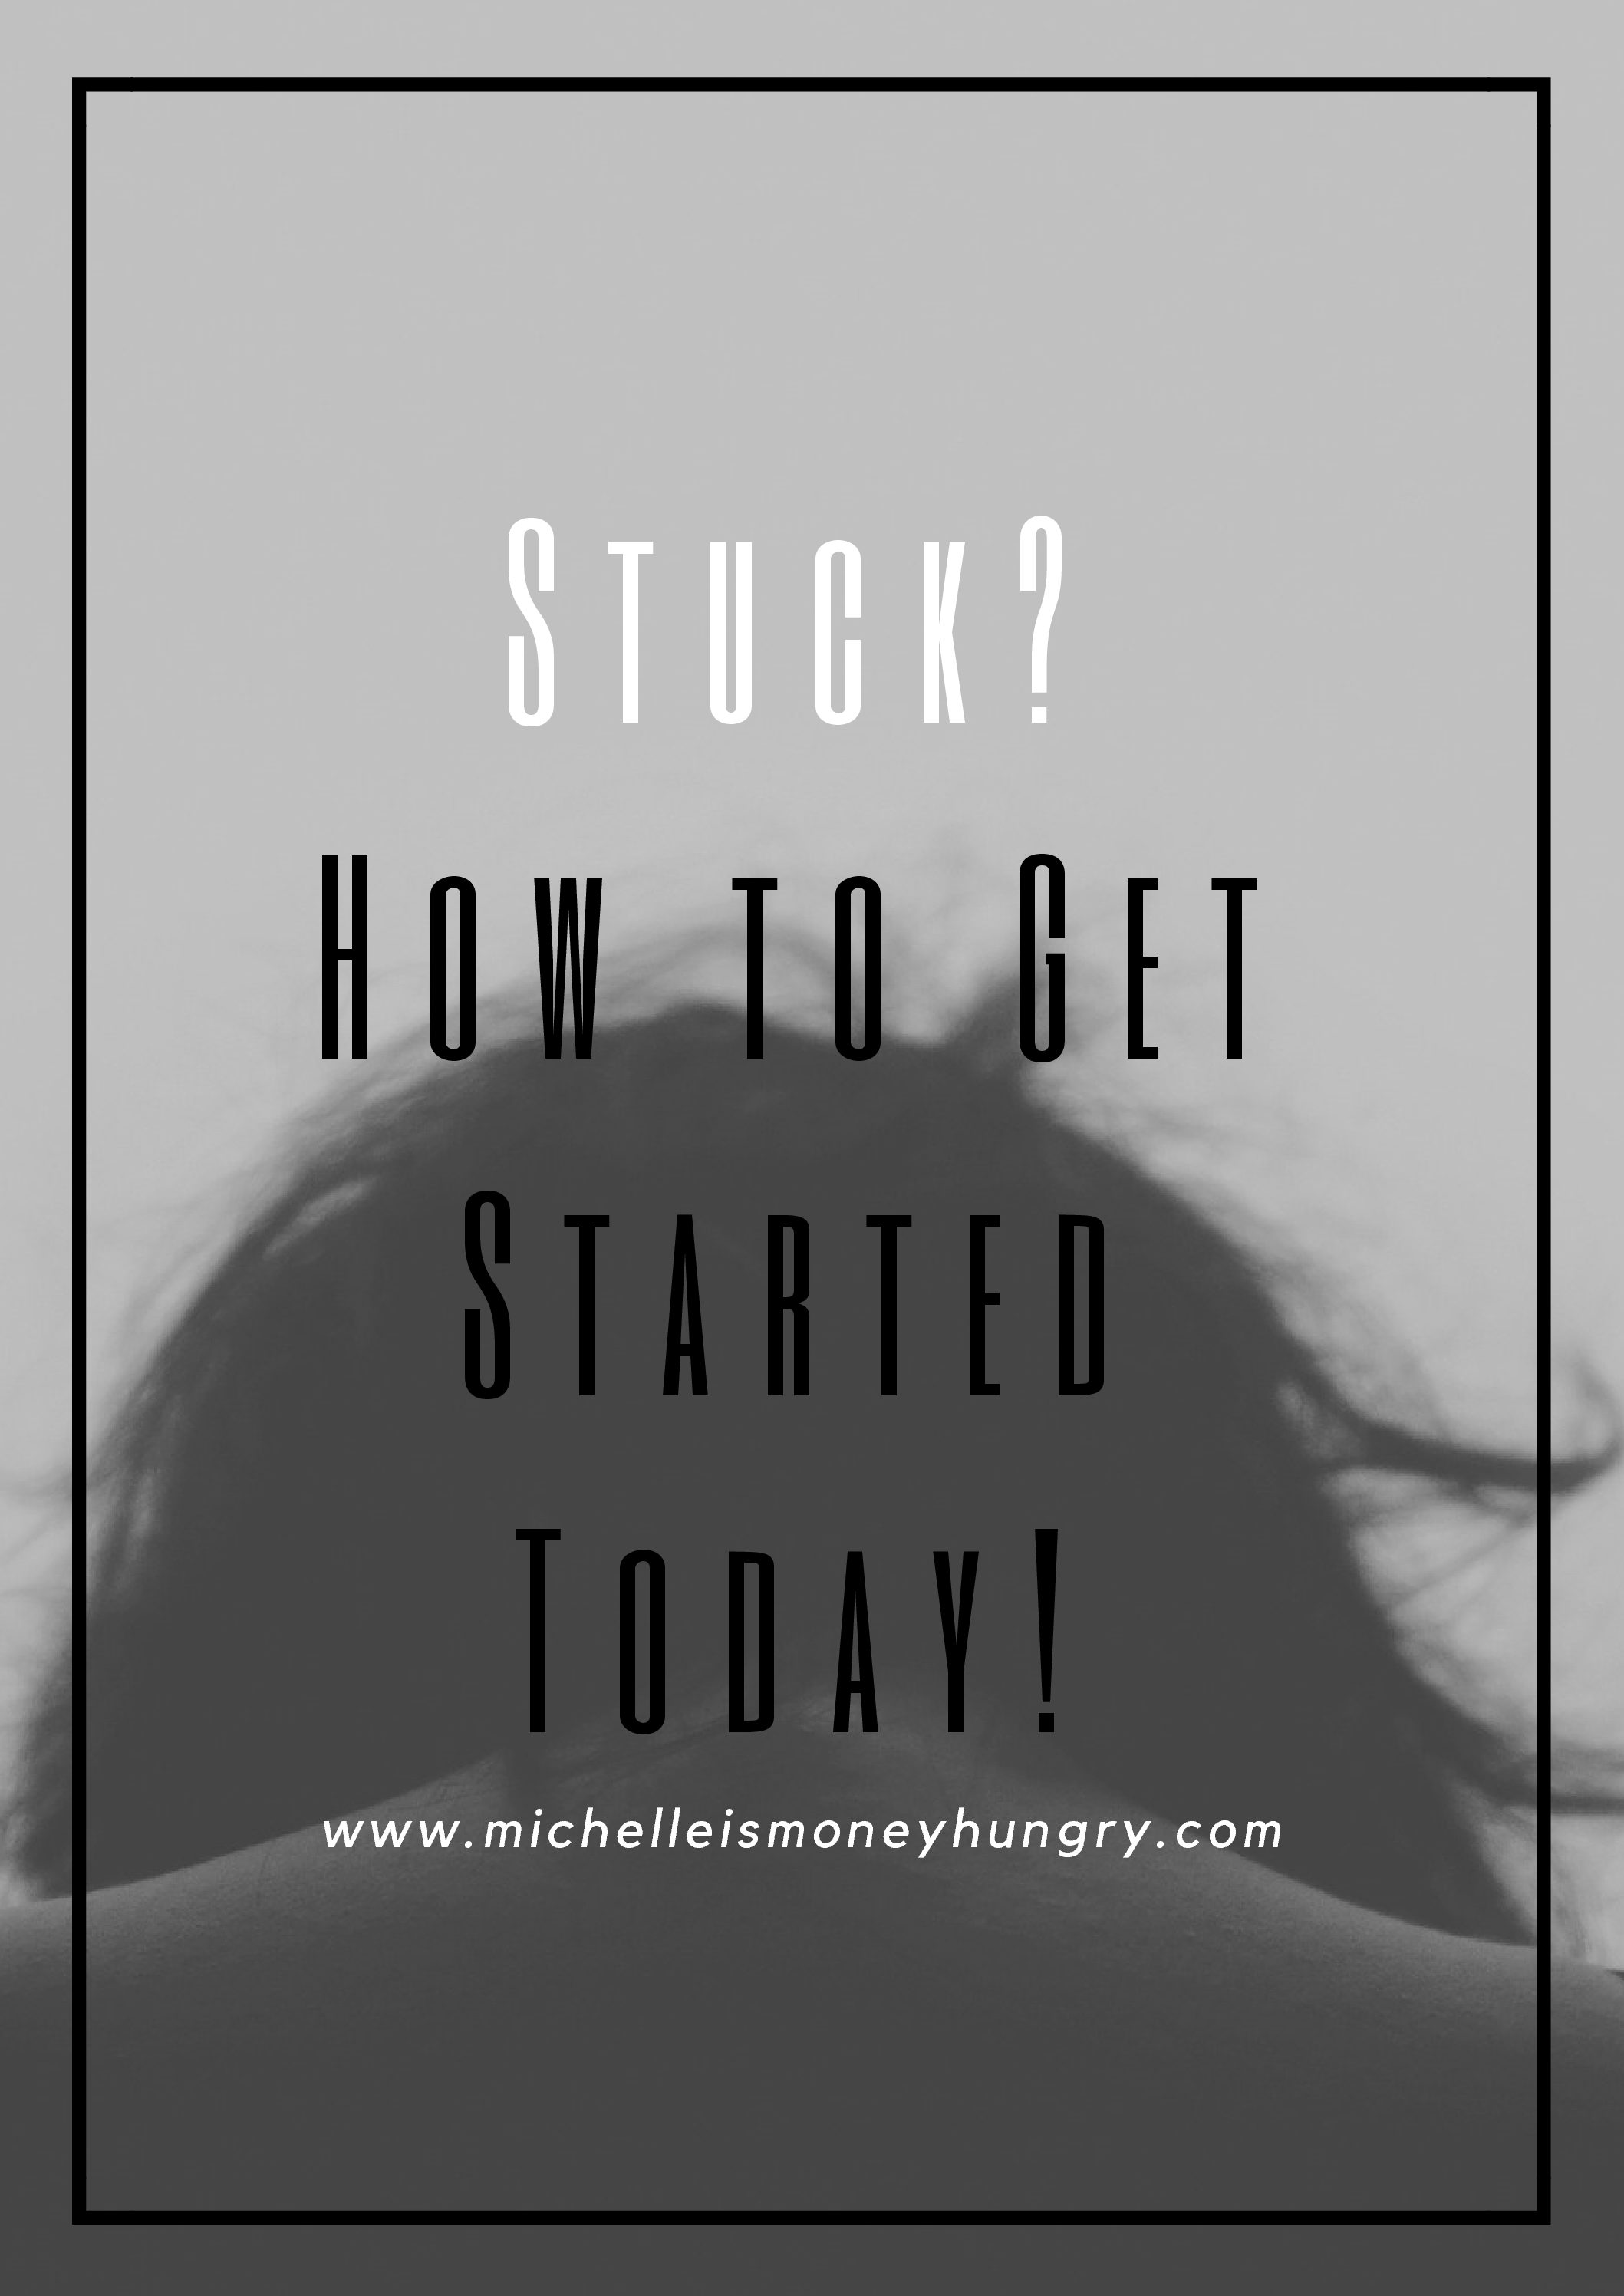 Stuck? How To Get Started TODAY!